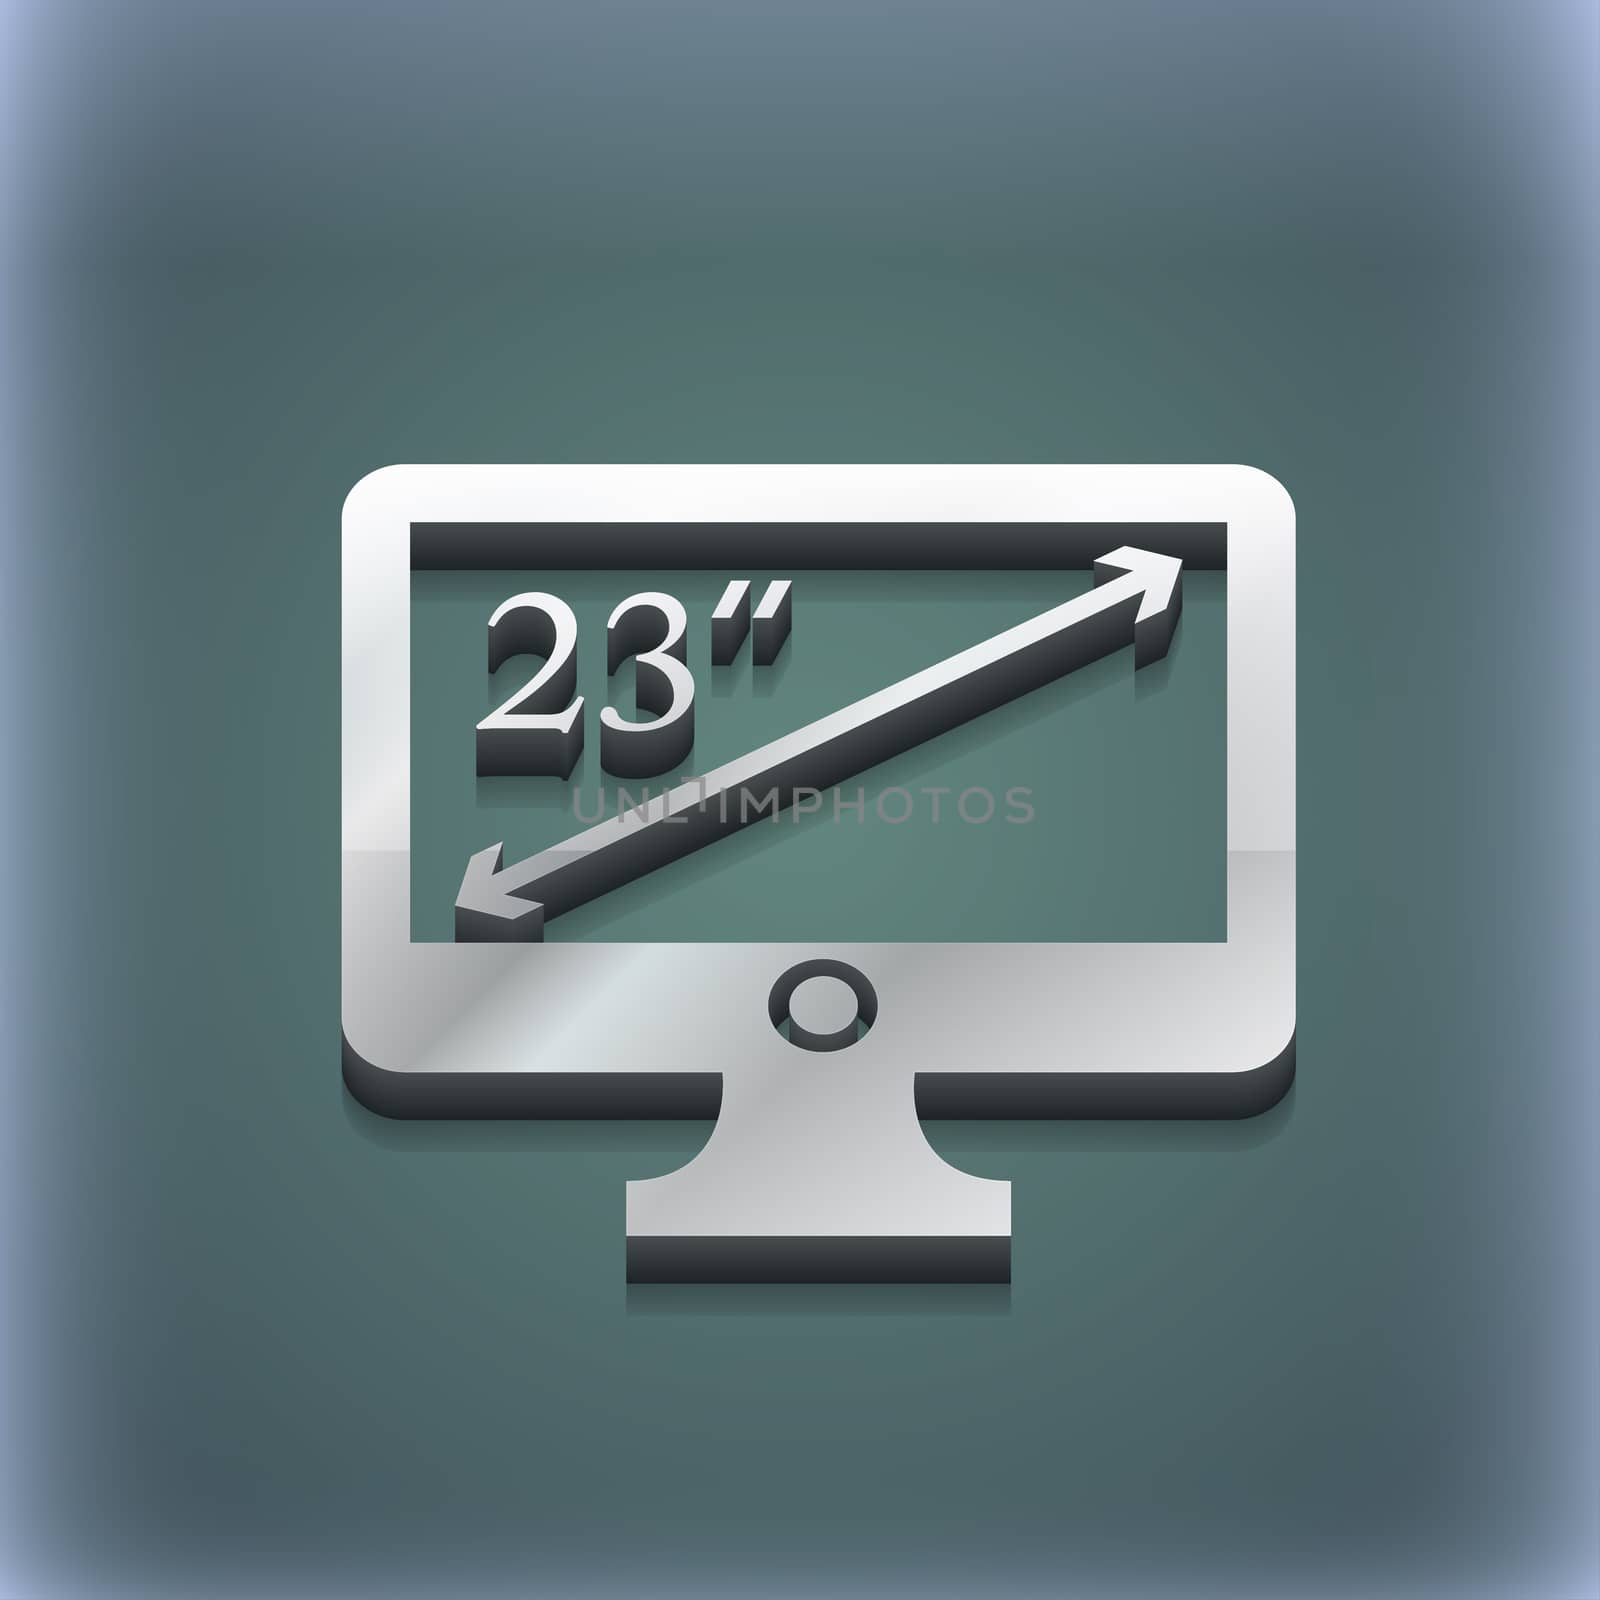 diagonal of the monitor 23 inches icon symbol. 3D style. Trendy, modern design with space for your text illustration. Raster version